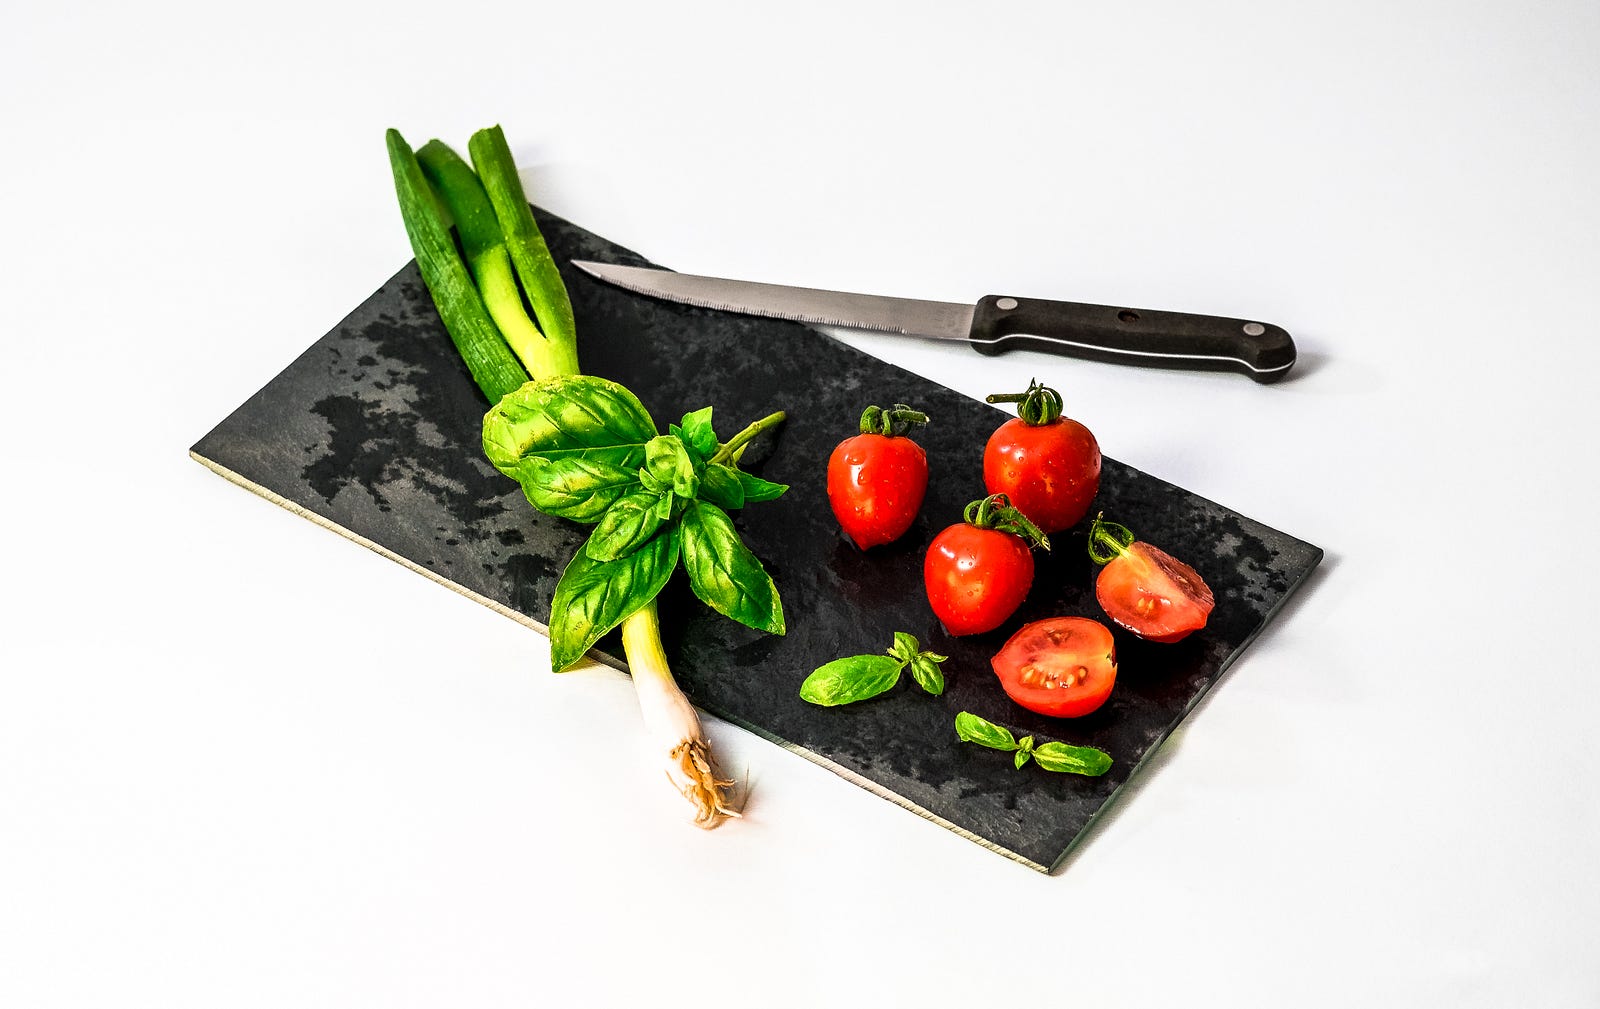 A cutting board (black) with small tomatos and a few leafy greens. A Mediterranean-style diet is associated with brain tangles and plaques that are associated with Alzheimer’s.